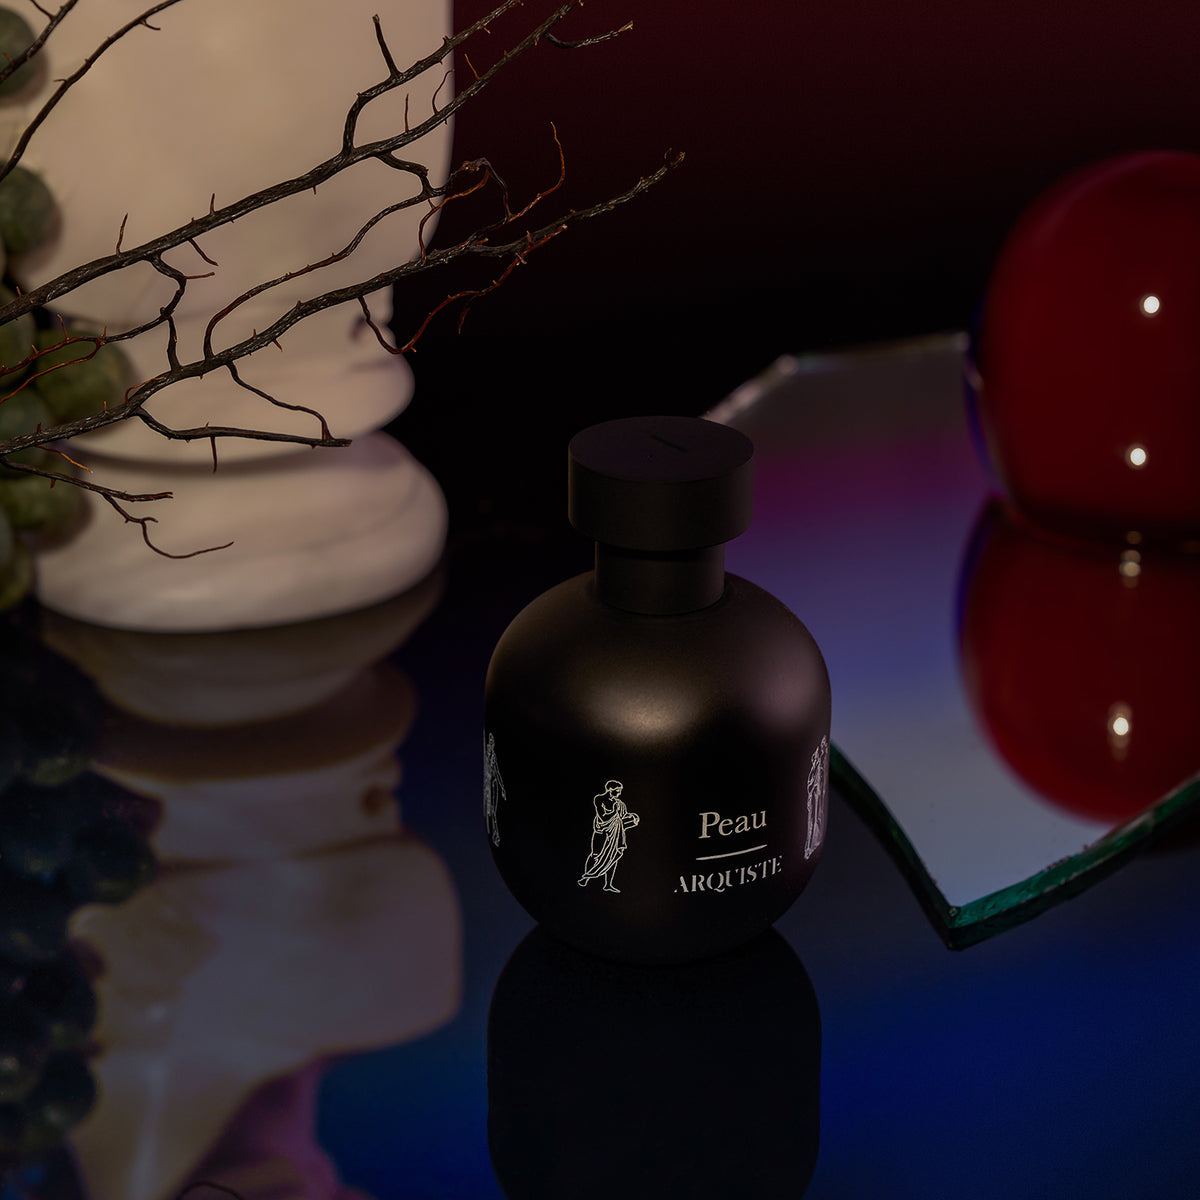 Peau by Arquiste » Reviews & Perfume Facts